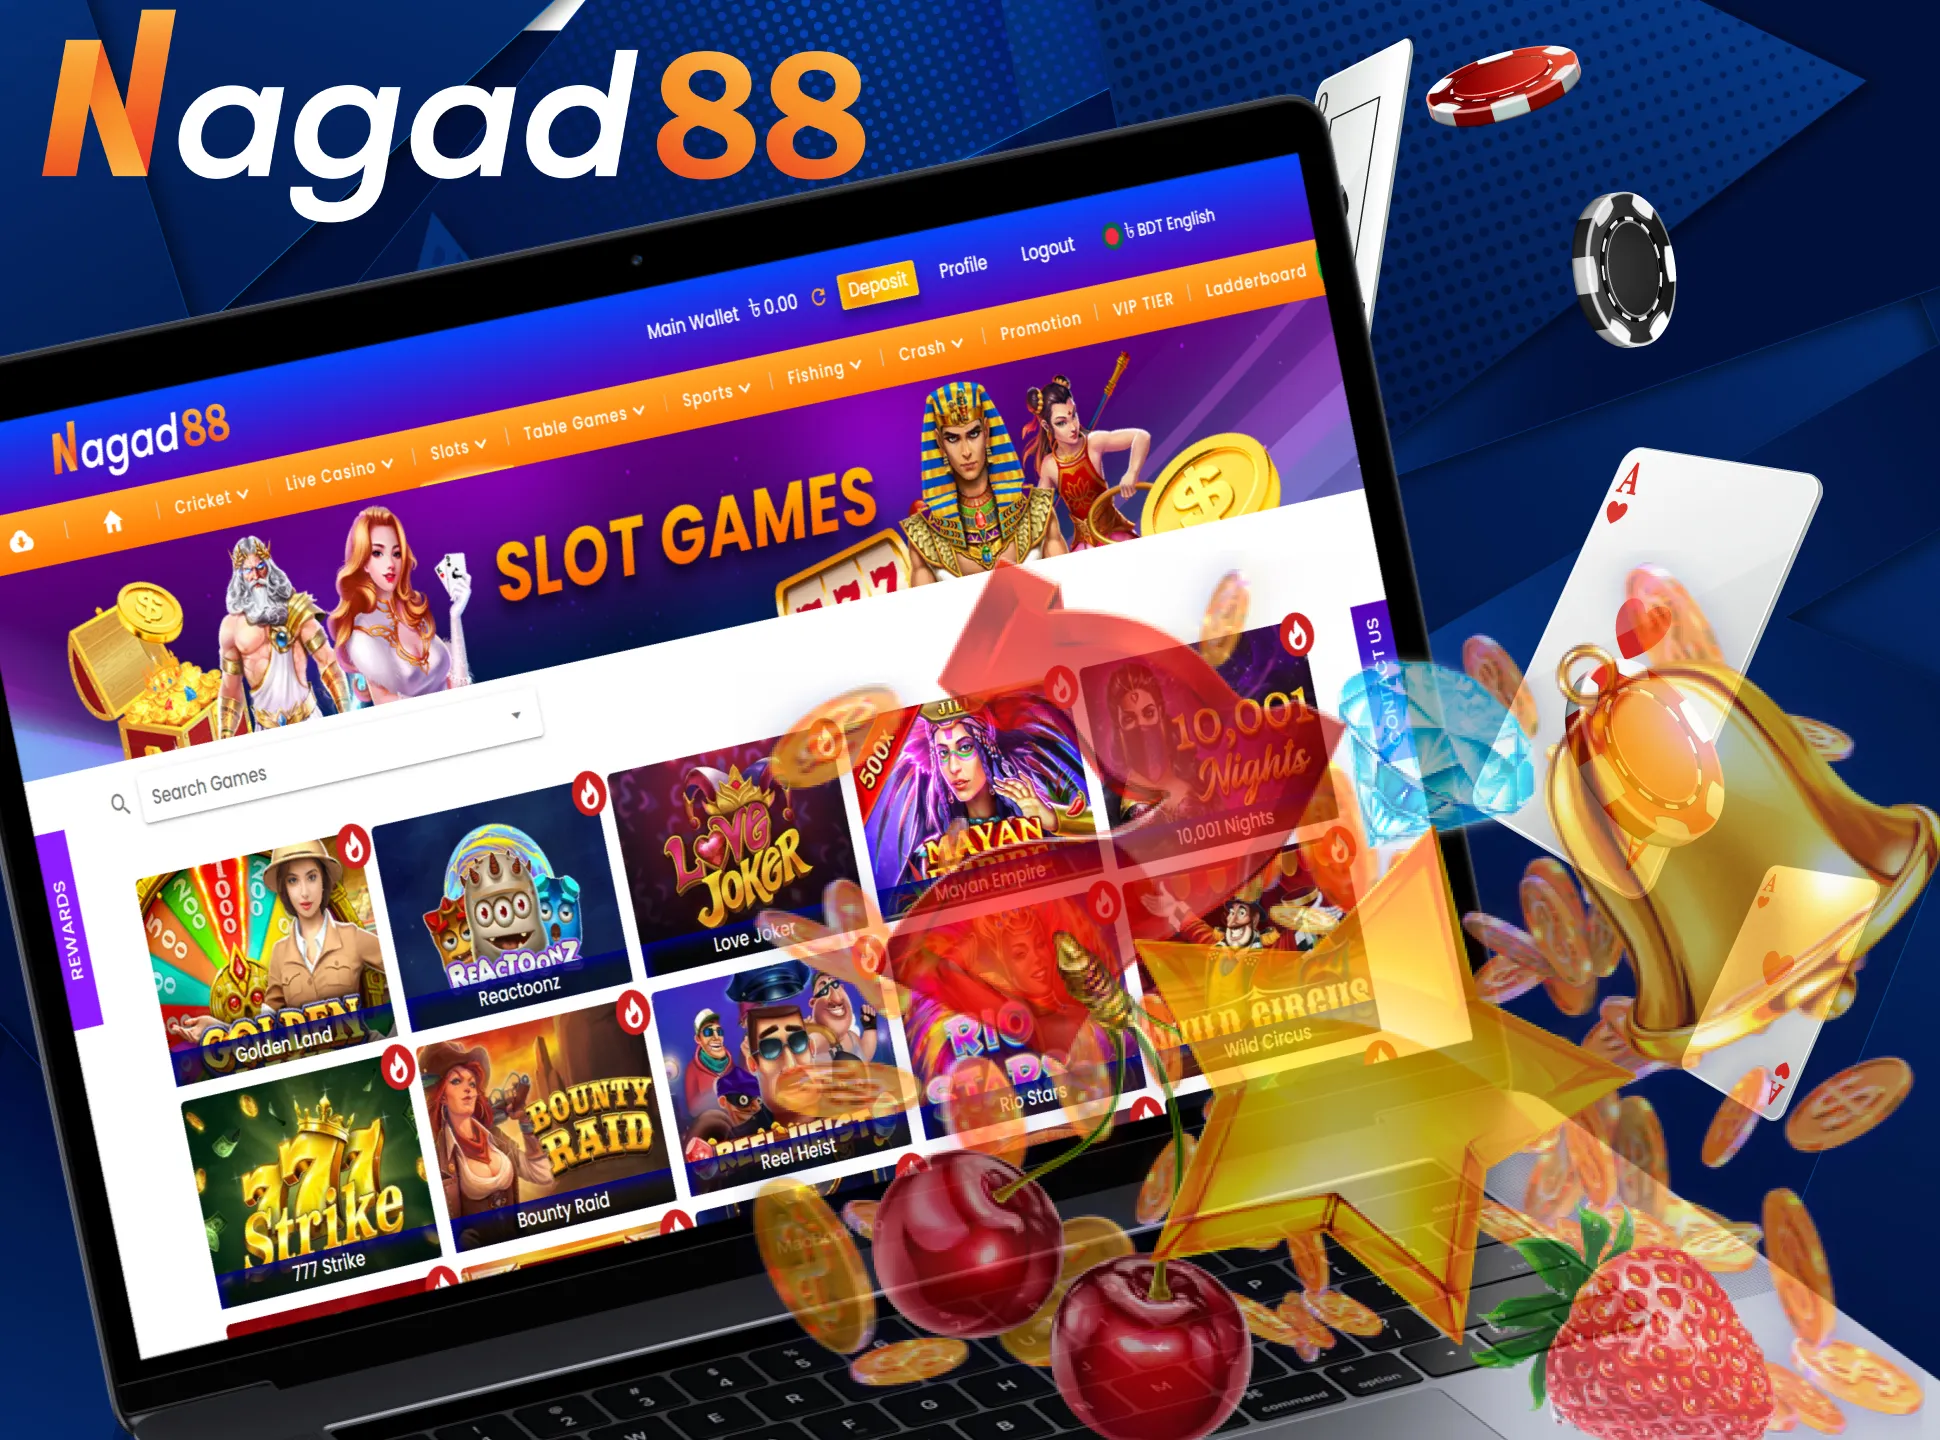 With Nagad88 try your luck in the slots.